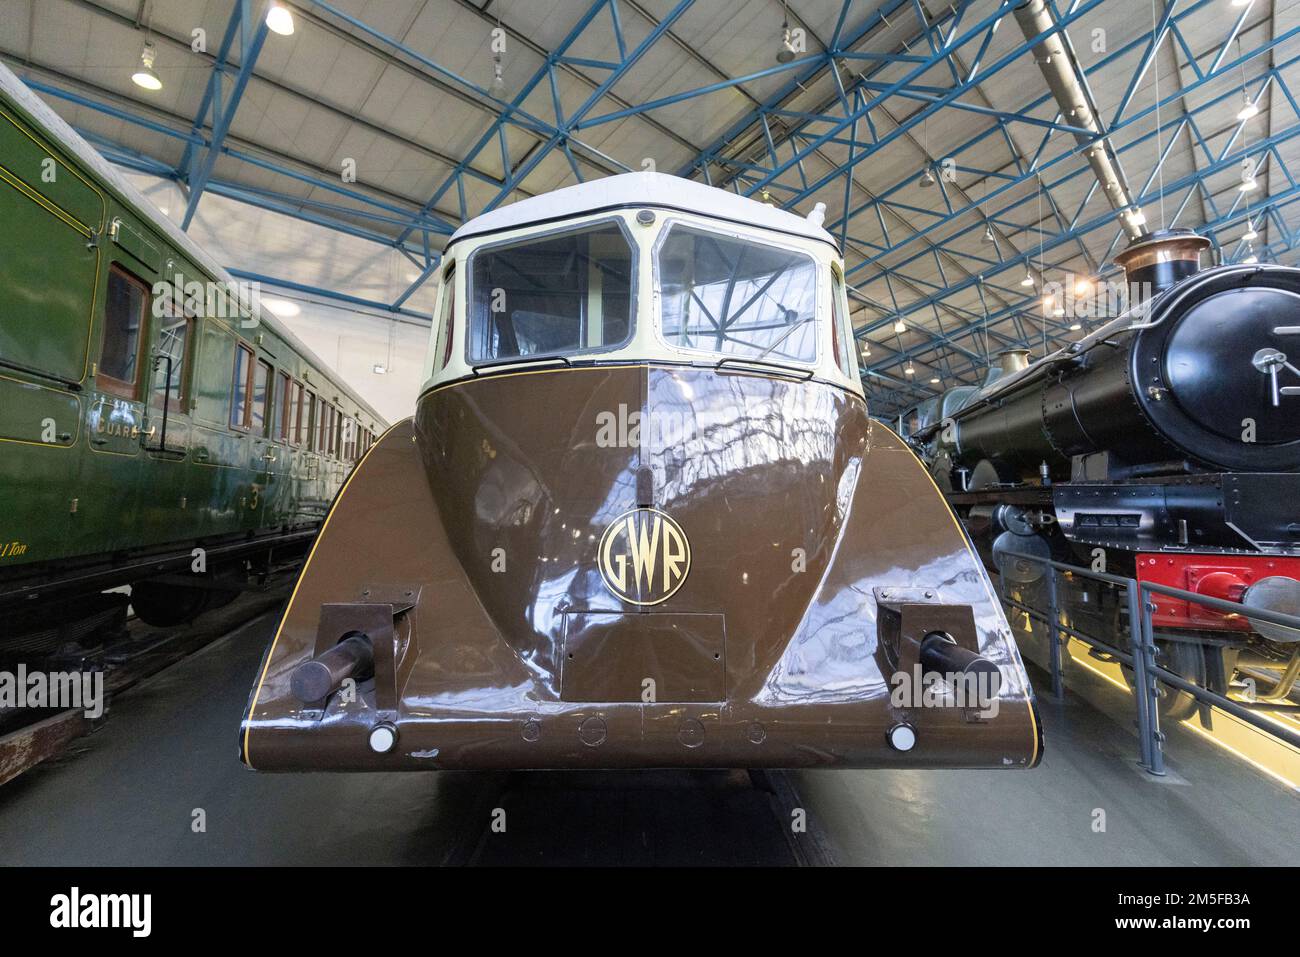 Classic GWR locomotives on display at the National Railway Museum. Stock Photo